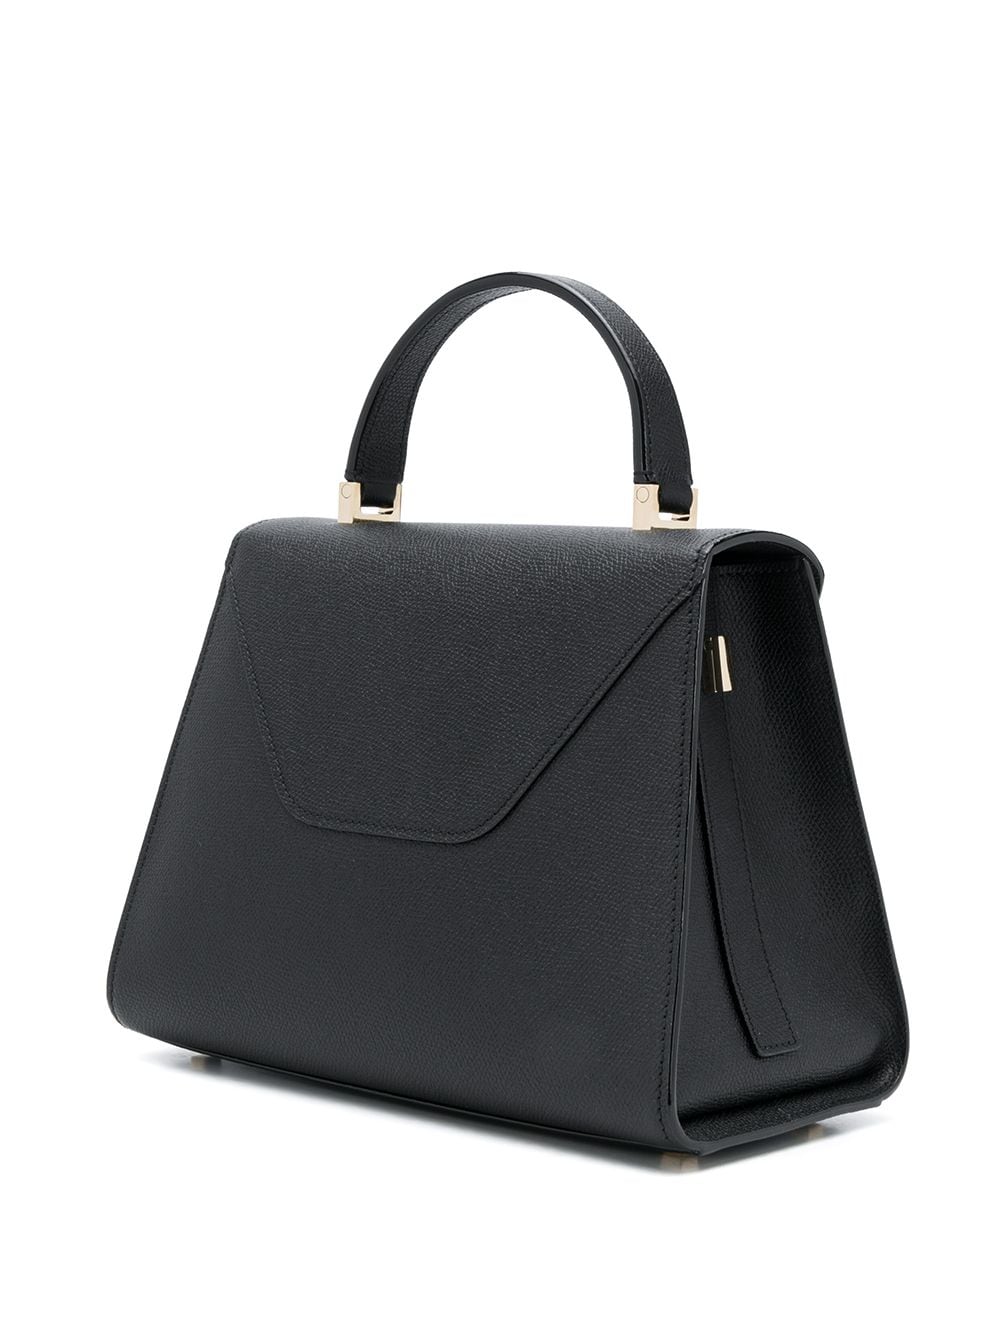 Valextra Iside Tote Bag - Farfetch